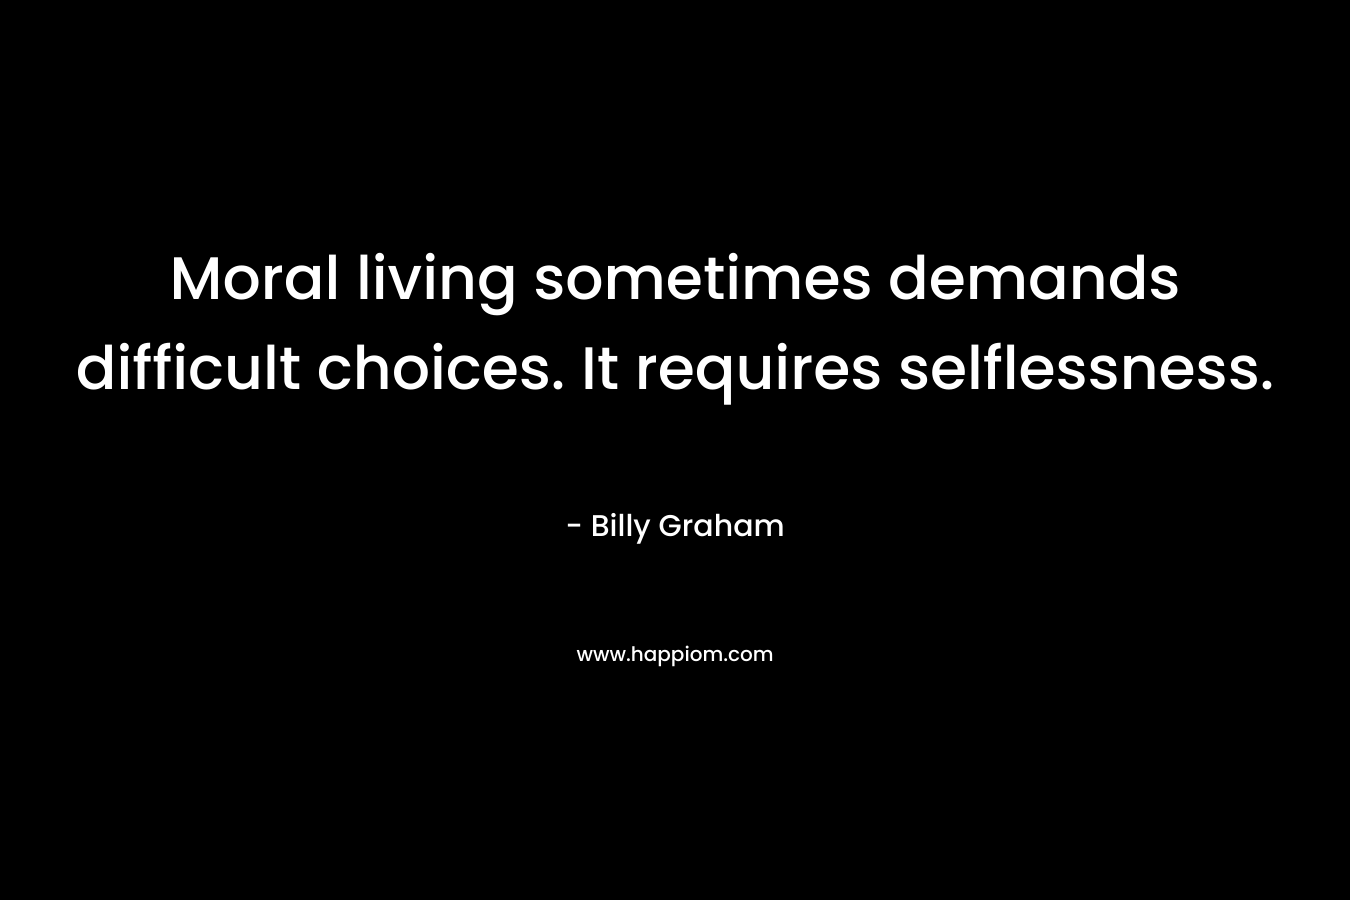 Moral living sometimes demands difficult choices. It requires selflessness. – Billy Graham